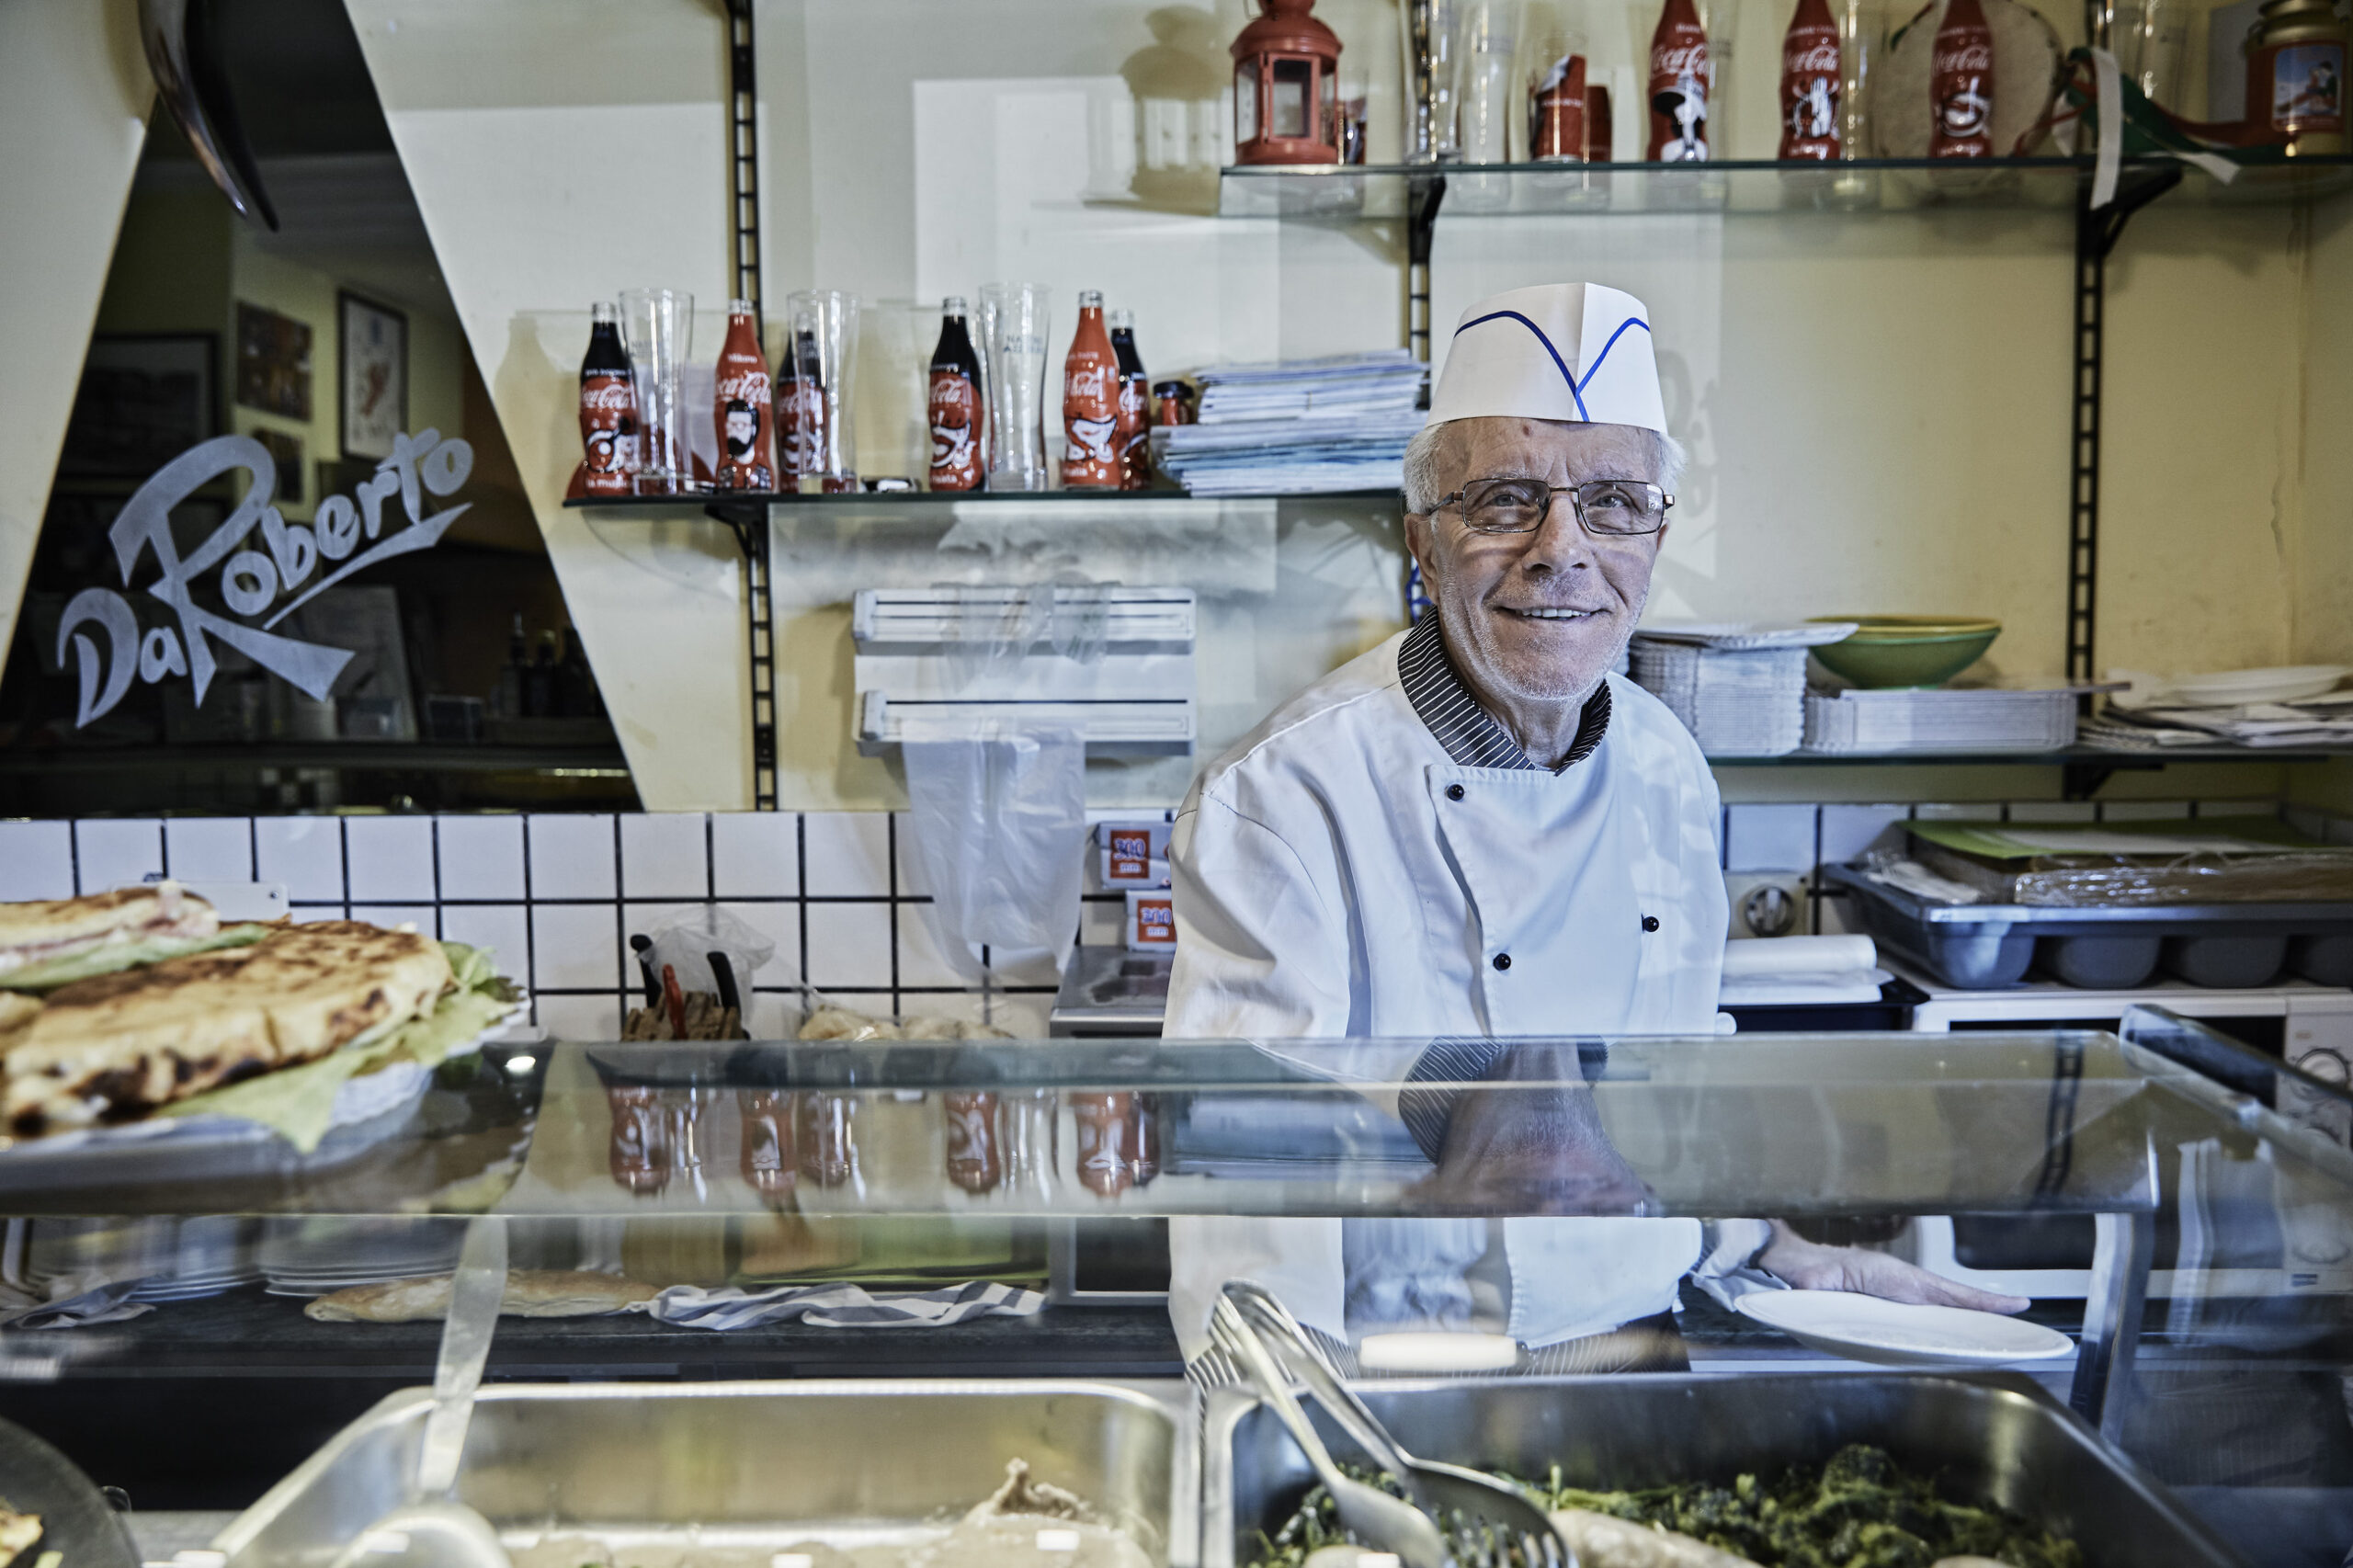 Roberto a cook in Pozzuoli offering catering for SSC Napoli